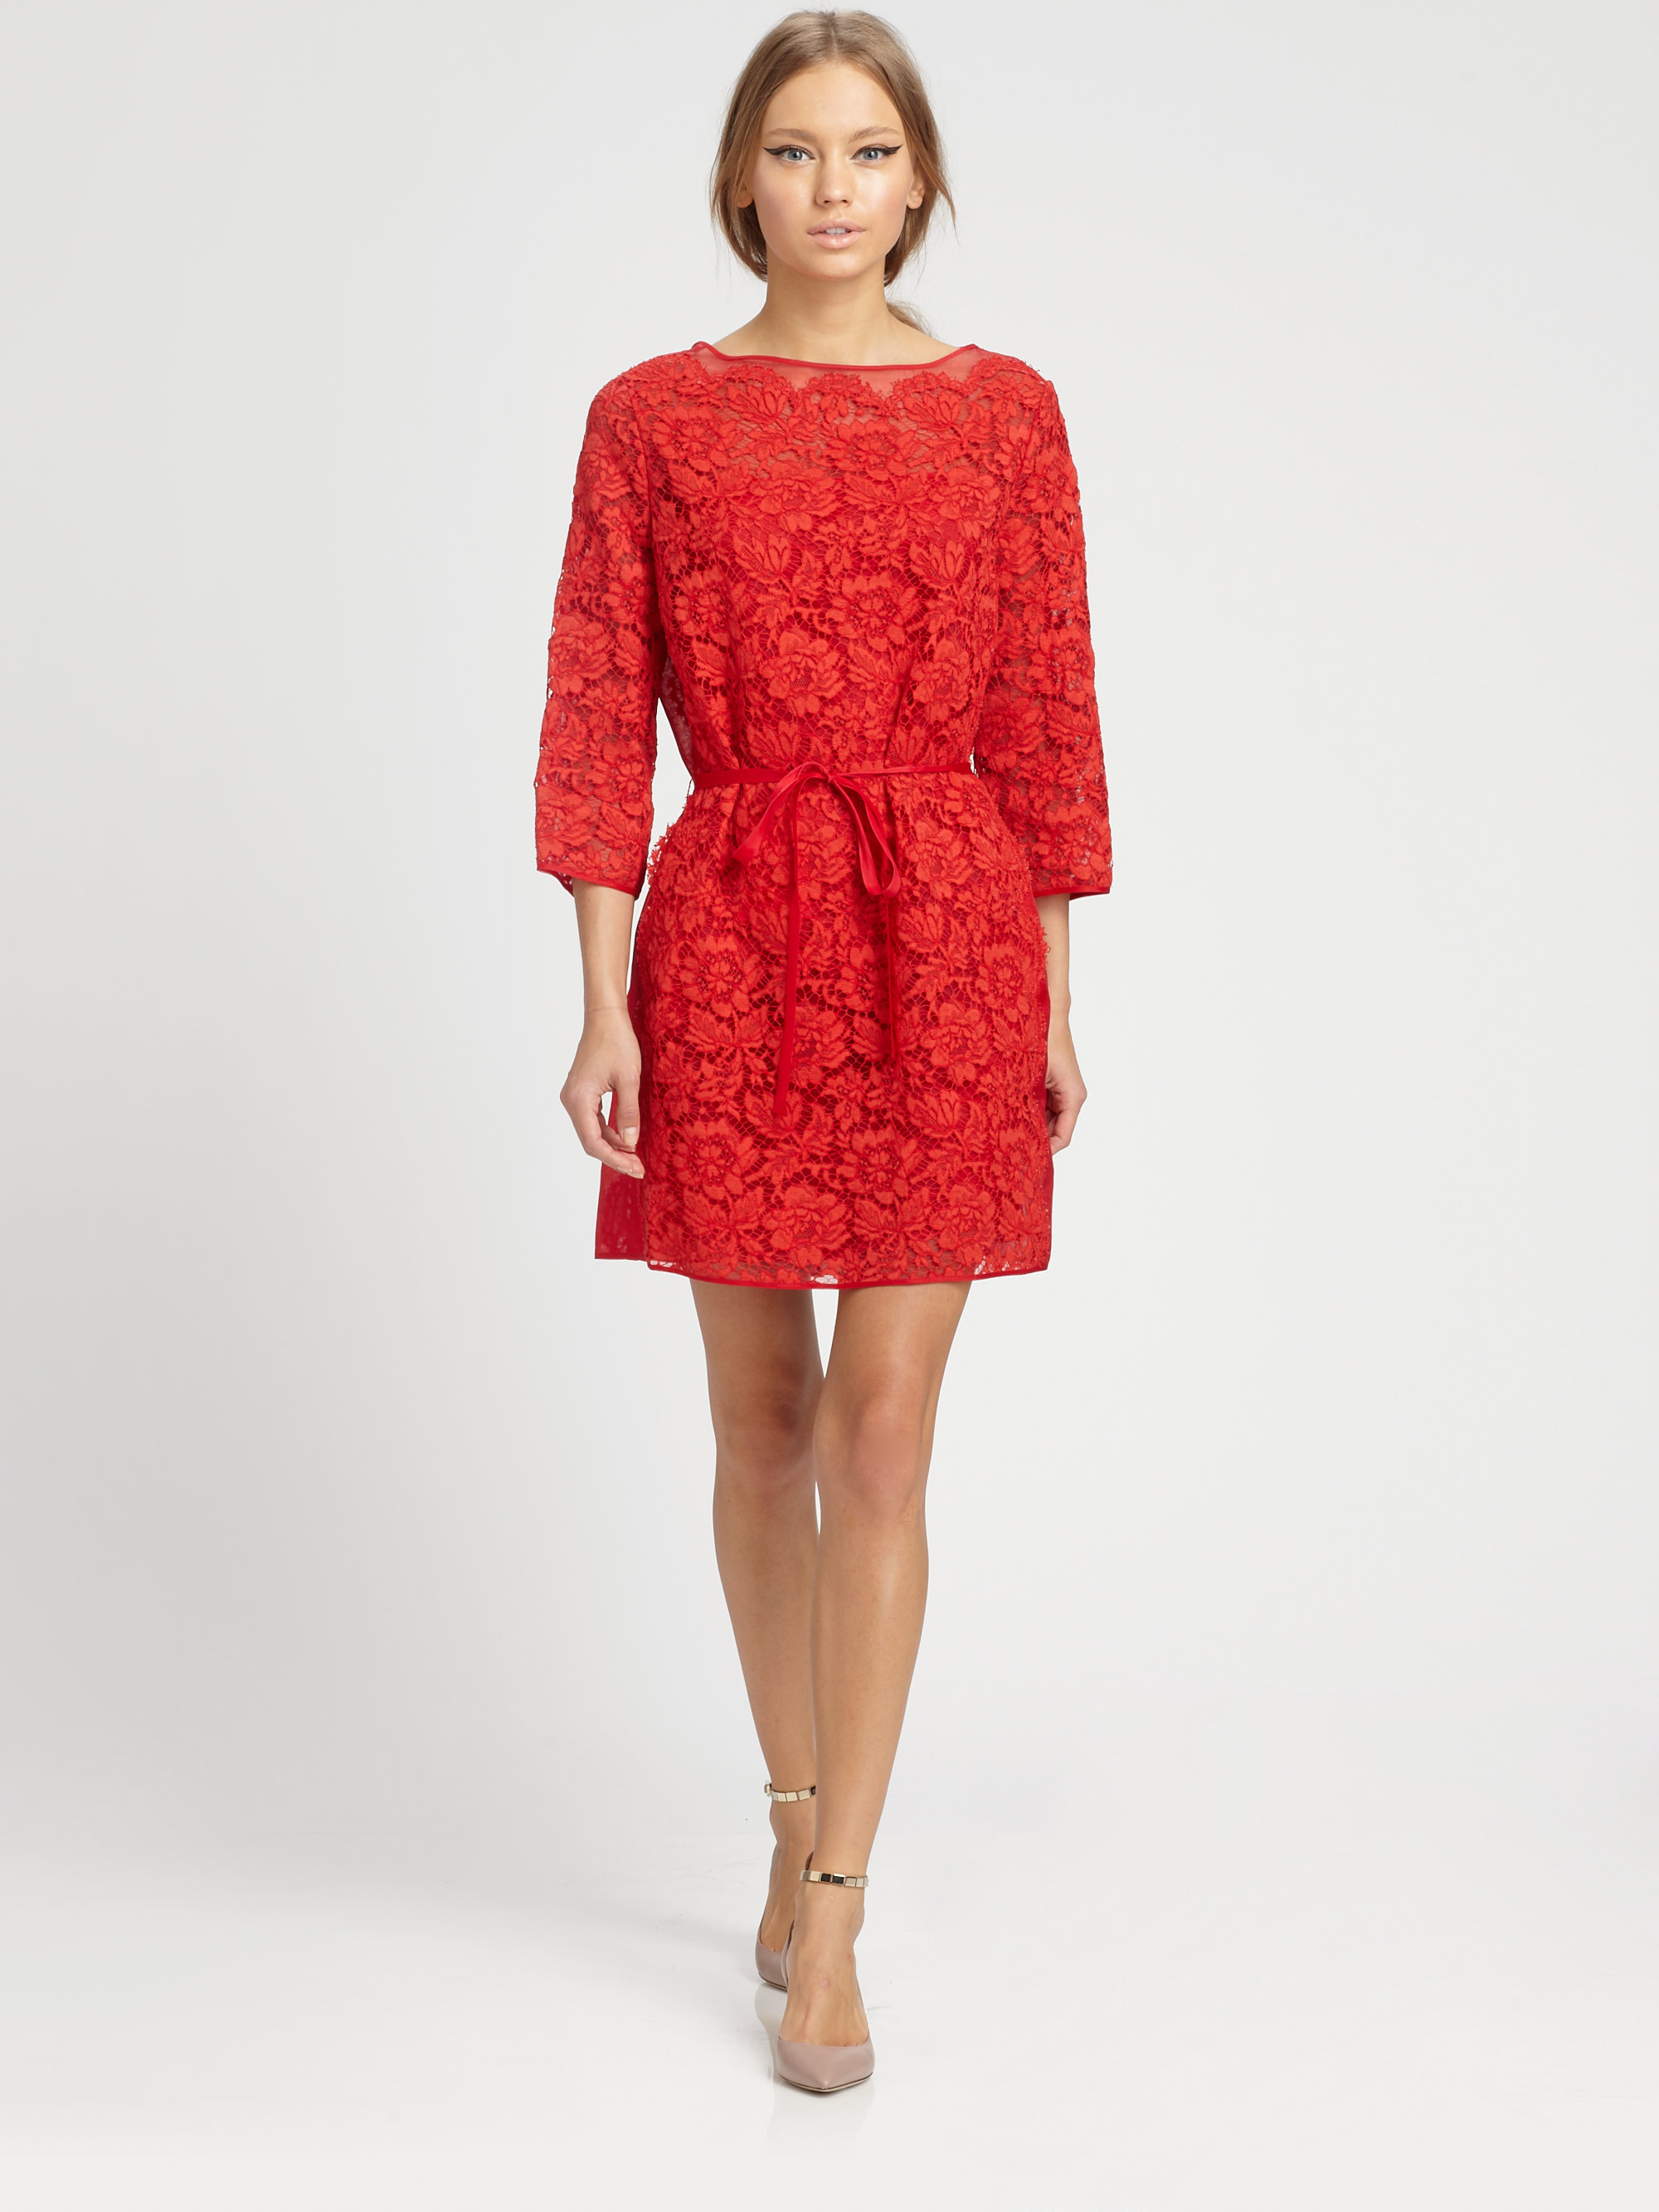 Valentino Lace Overlay Dress in Red - Lyst